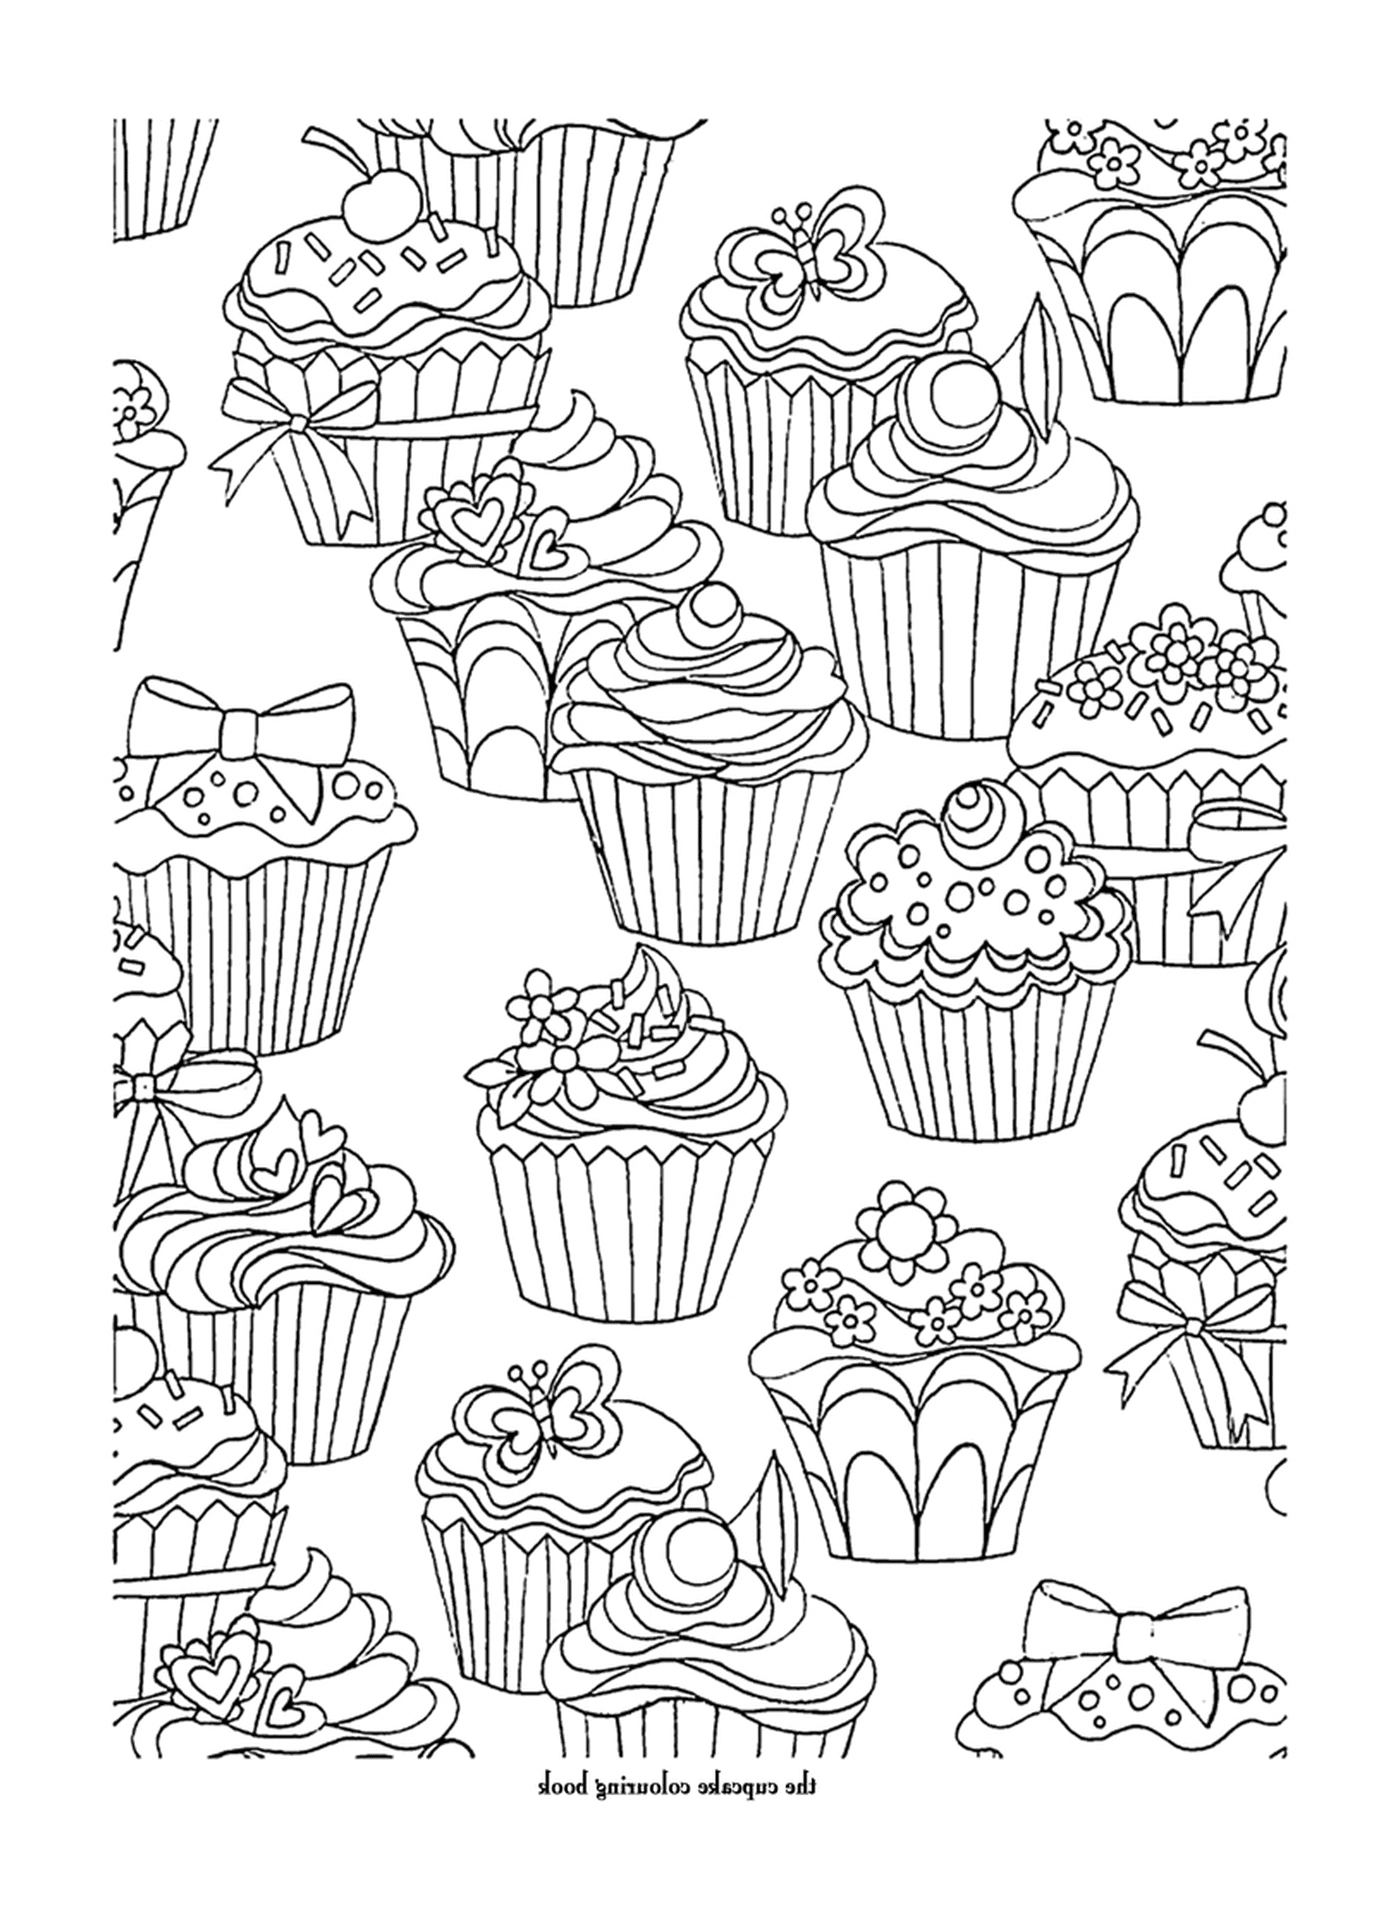  a pattern of many cupcakes 